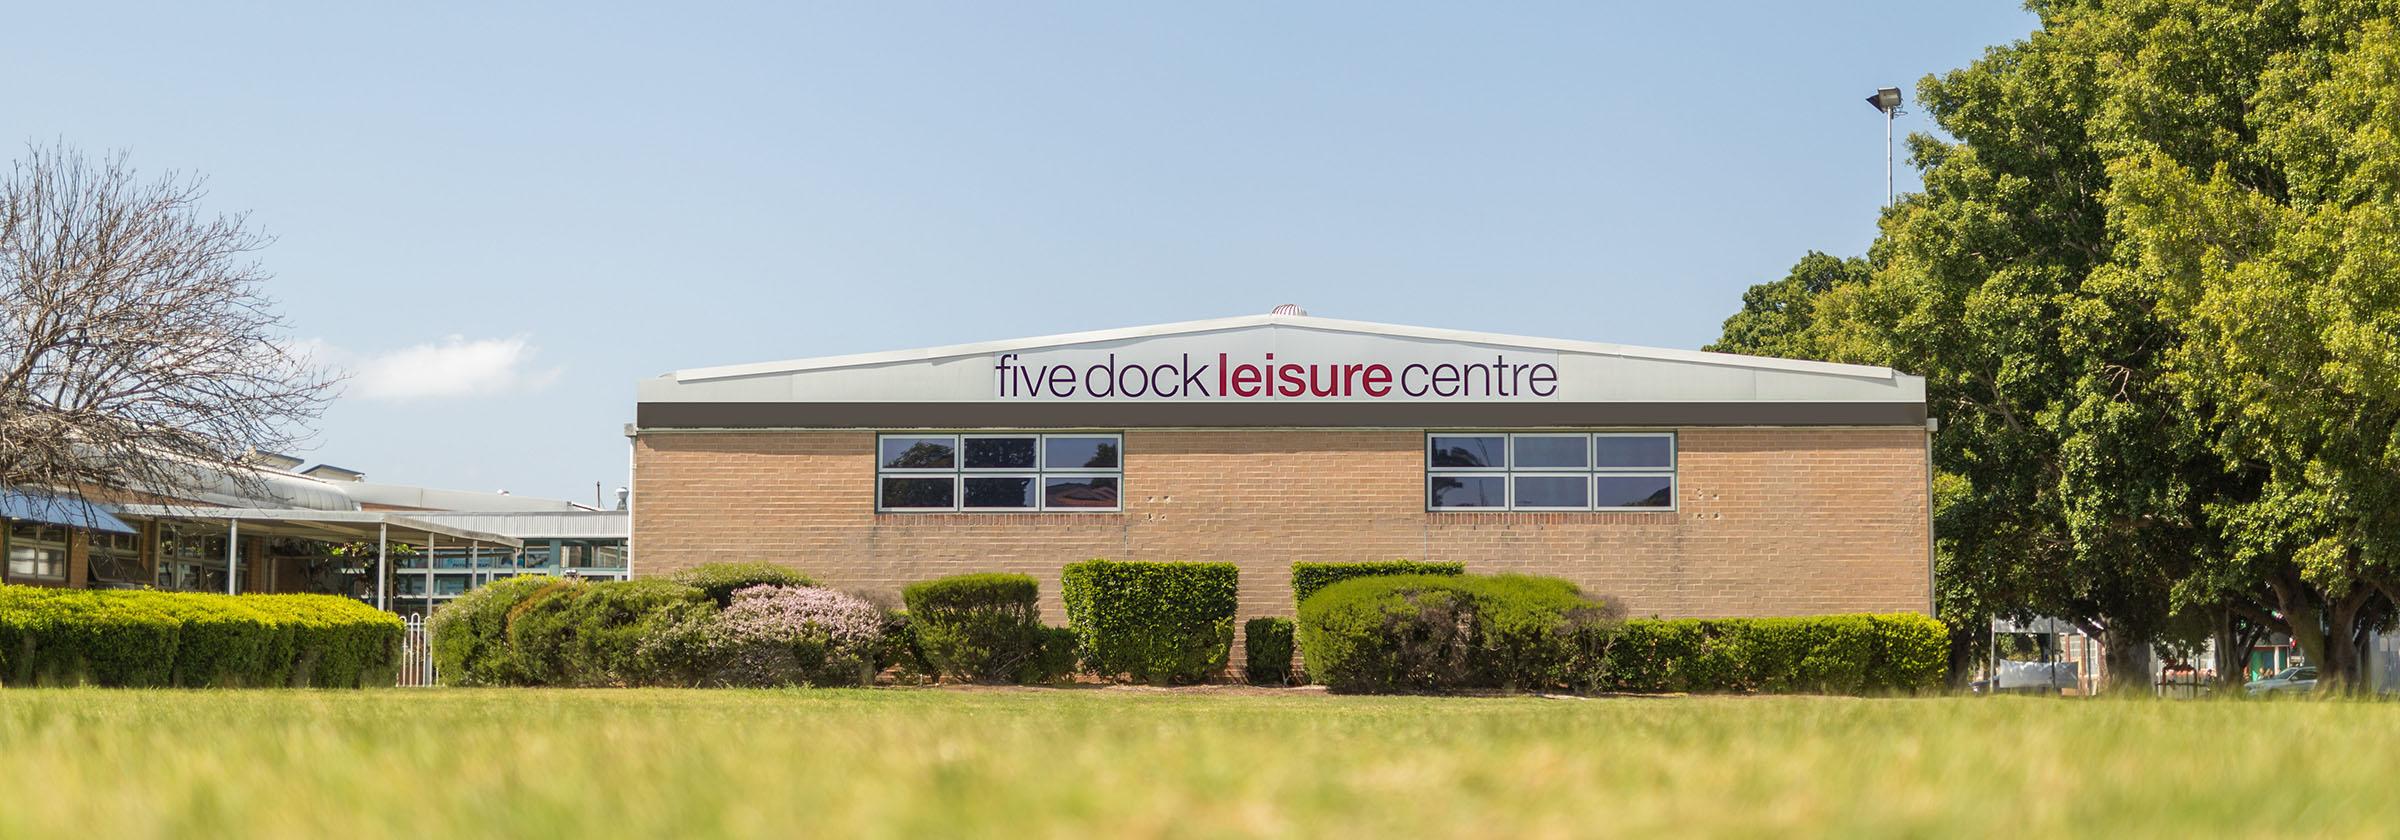 Image of Five Dock Leisure Centre building and park infront